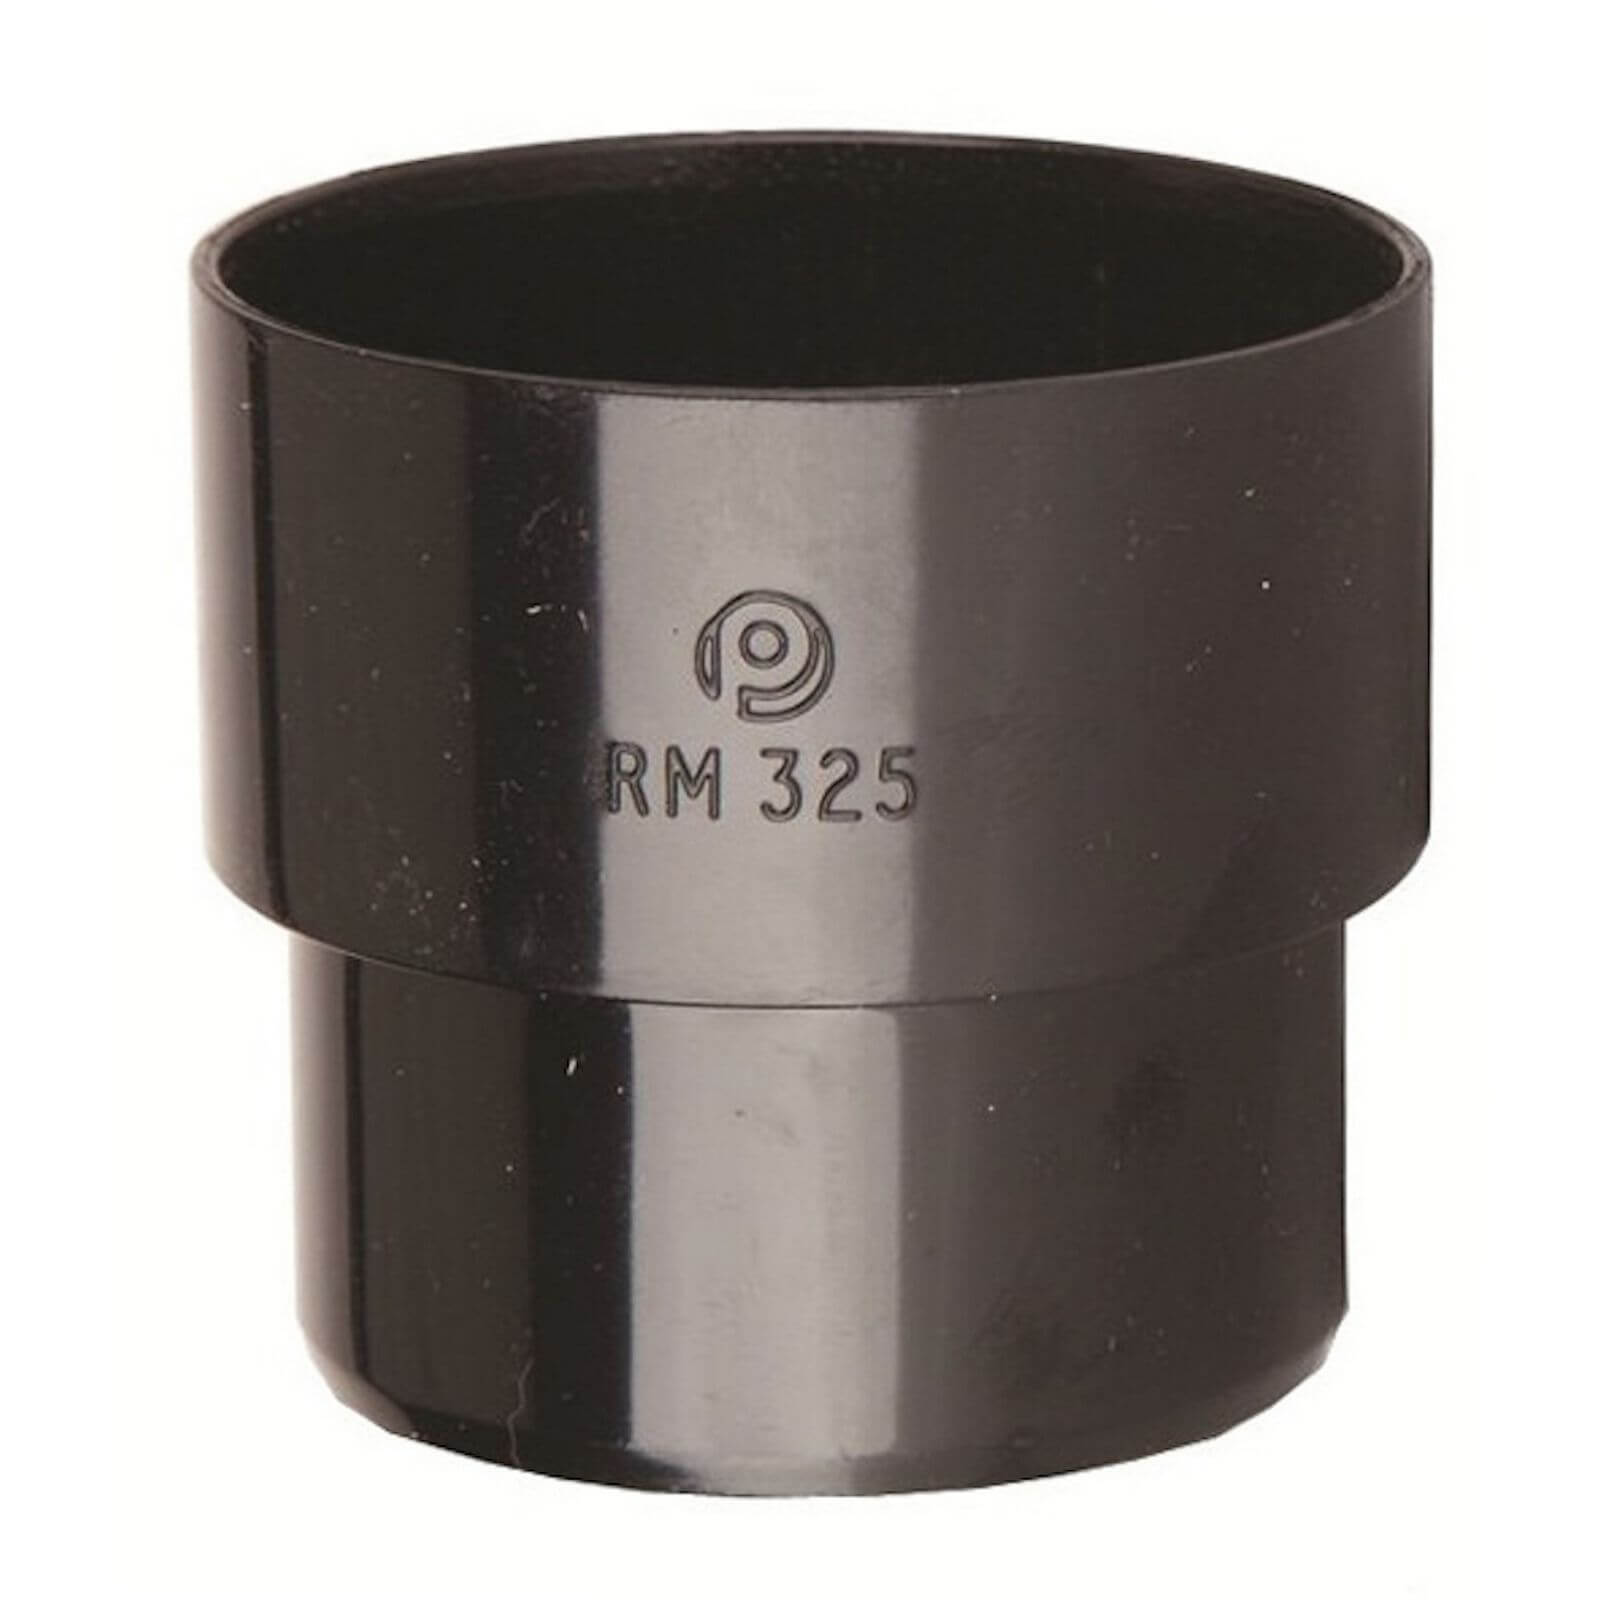 Polypipe Round Downpipe Connector - 50mm - Black